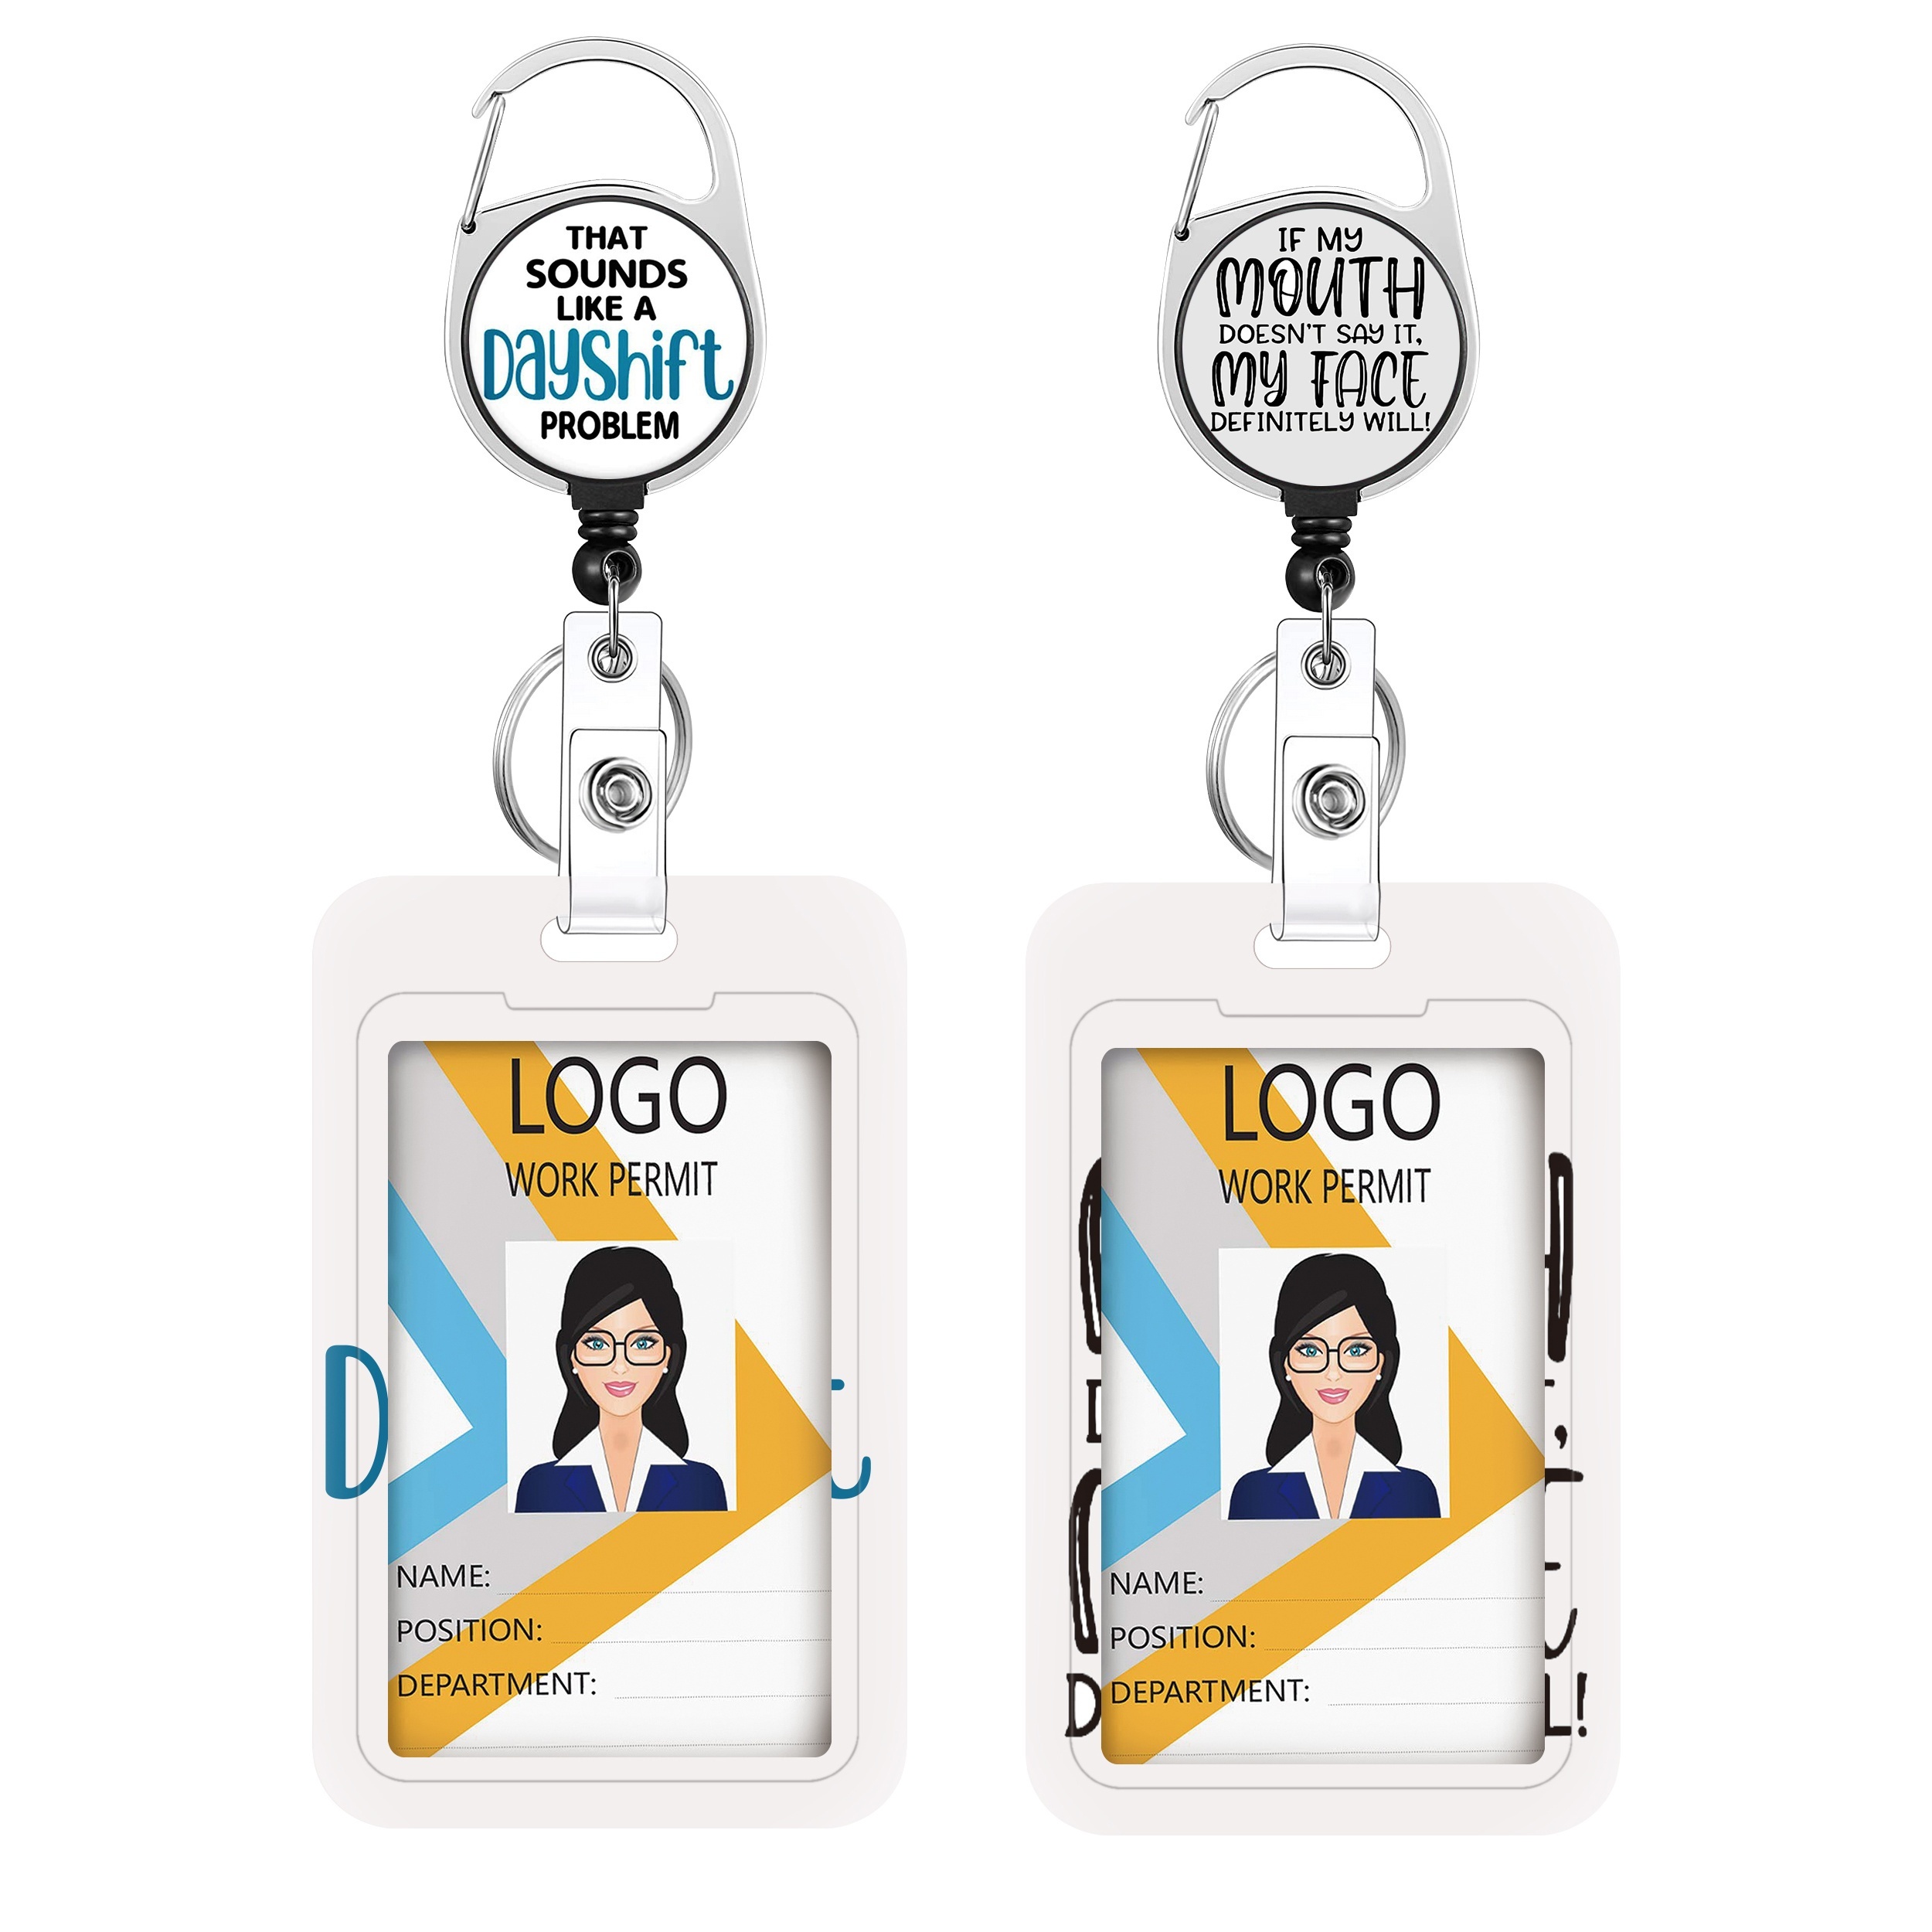 2 Sets Of Badge Clips, Rotatable Retractable Badge Reels, ID Card Holders,  Suitable For Medical Staff, Office Workers, Conference Attendees, Access